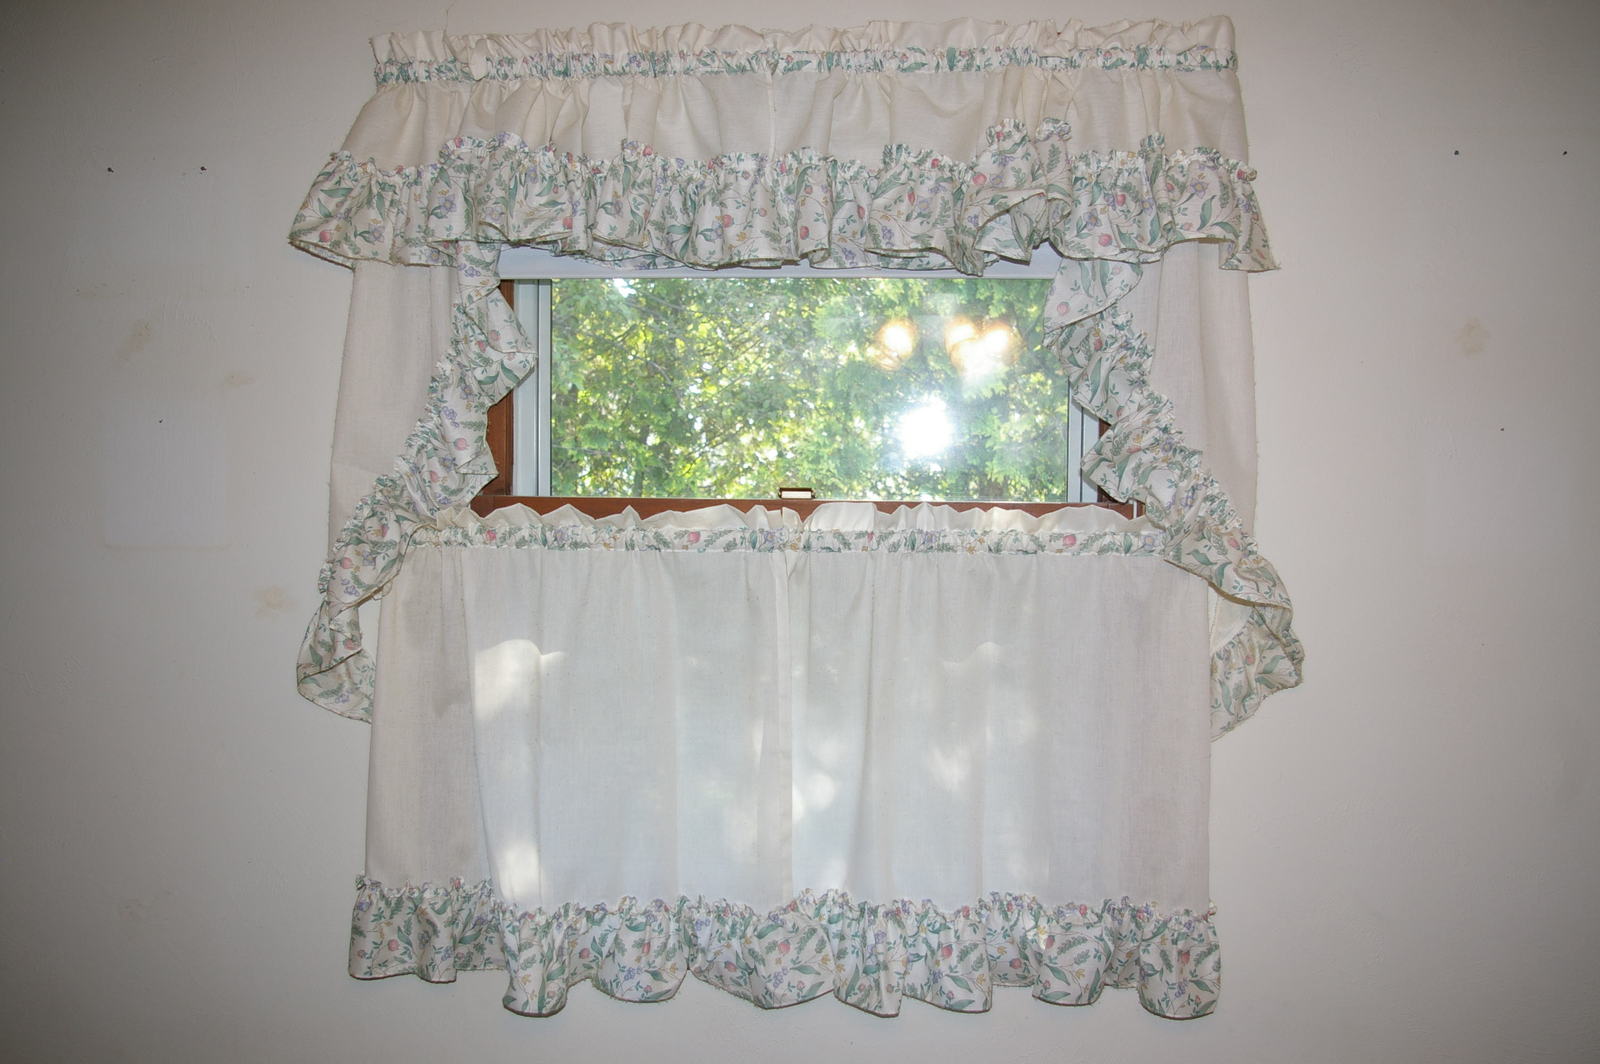 Primary image for Pfaltzgraff April Insert Valance Curtain 51" x 12"